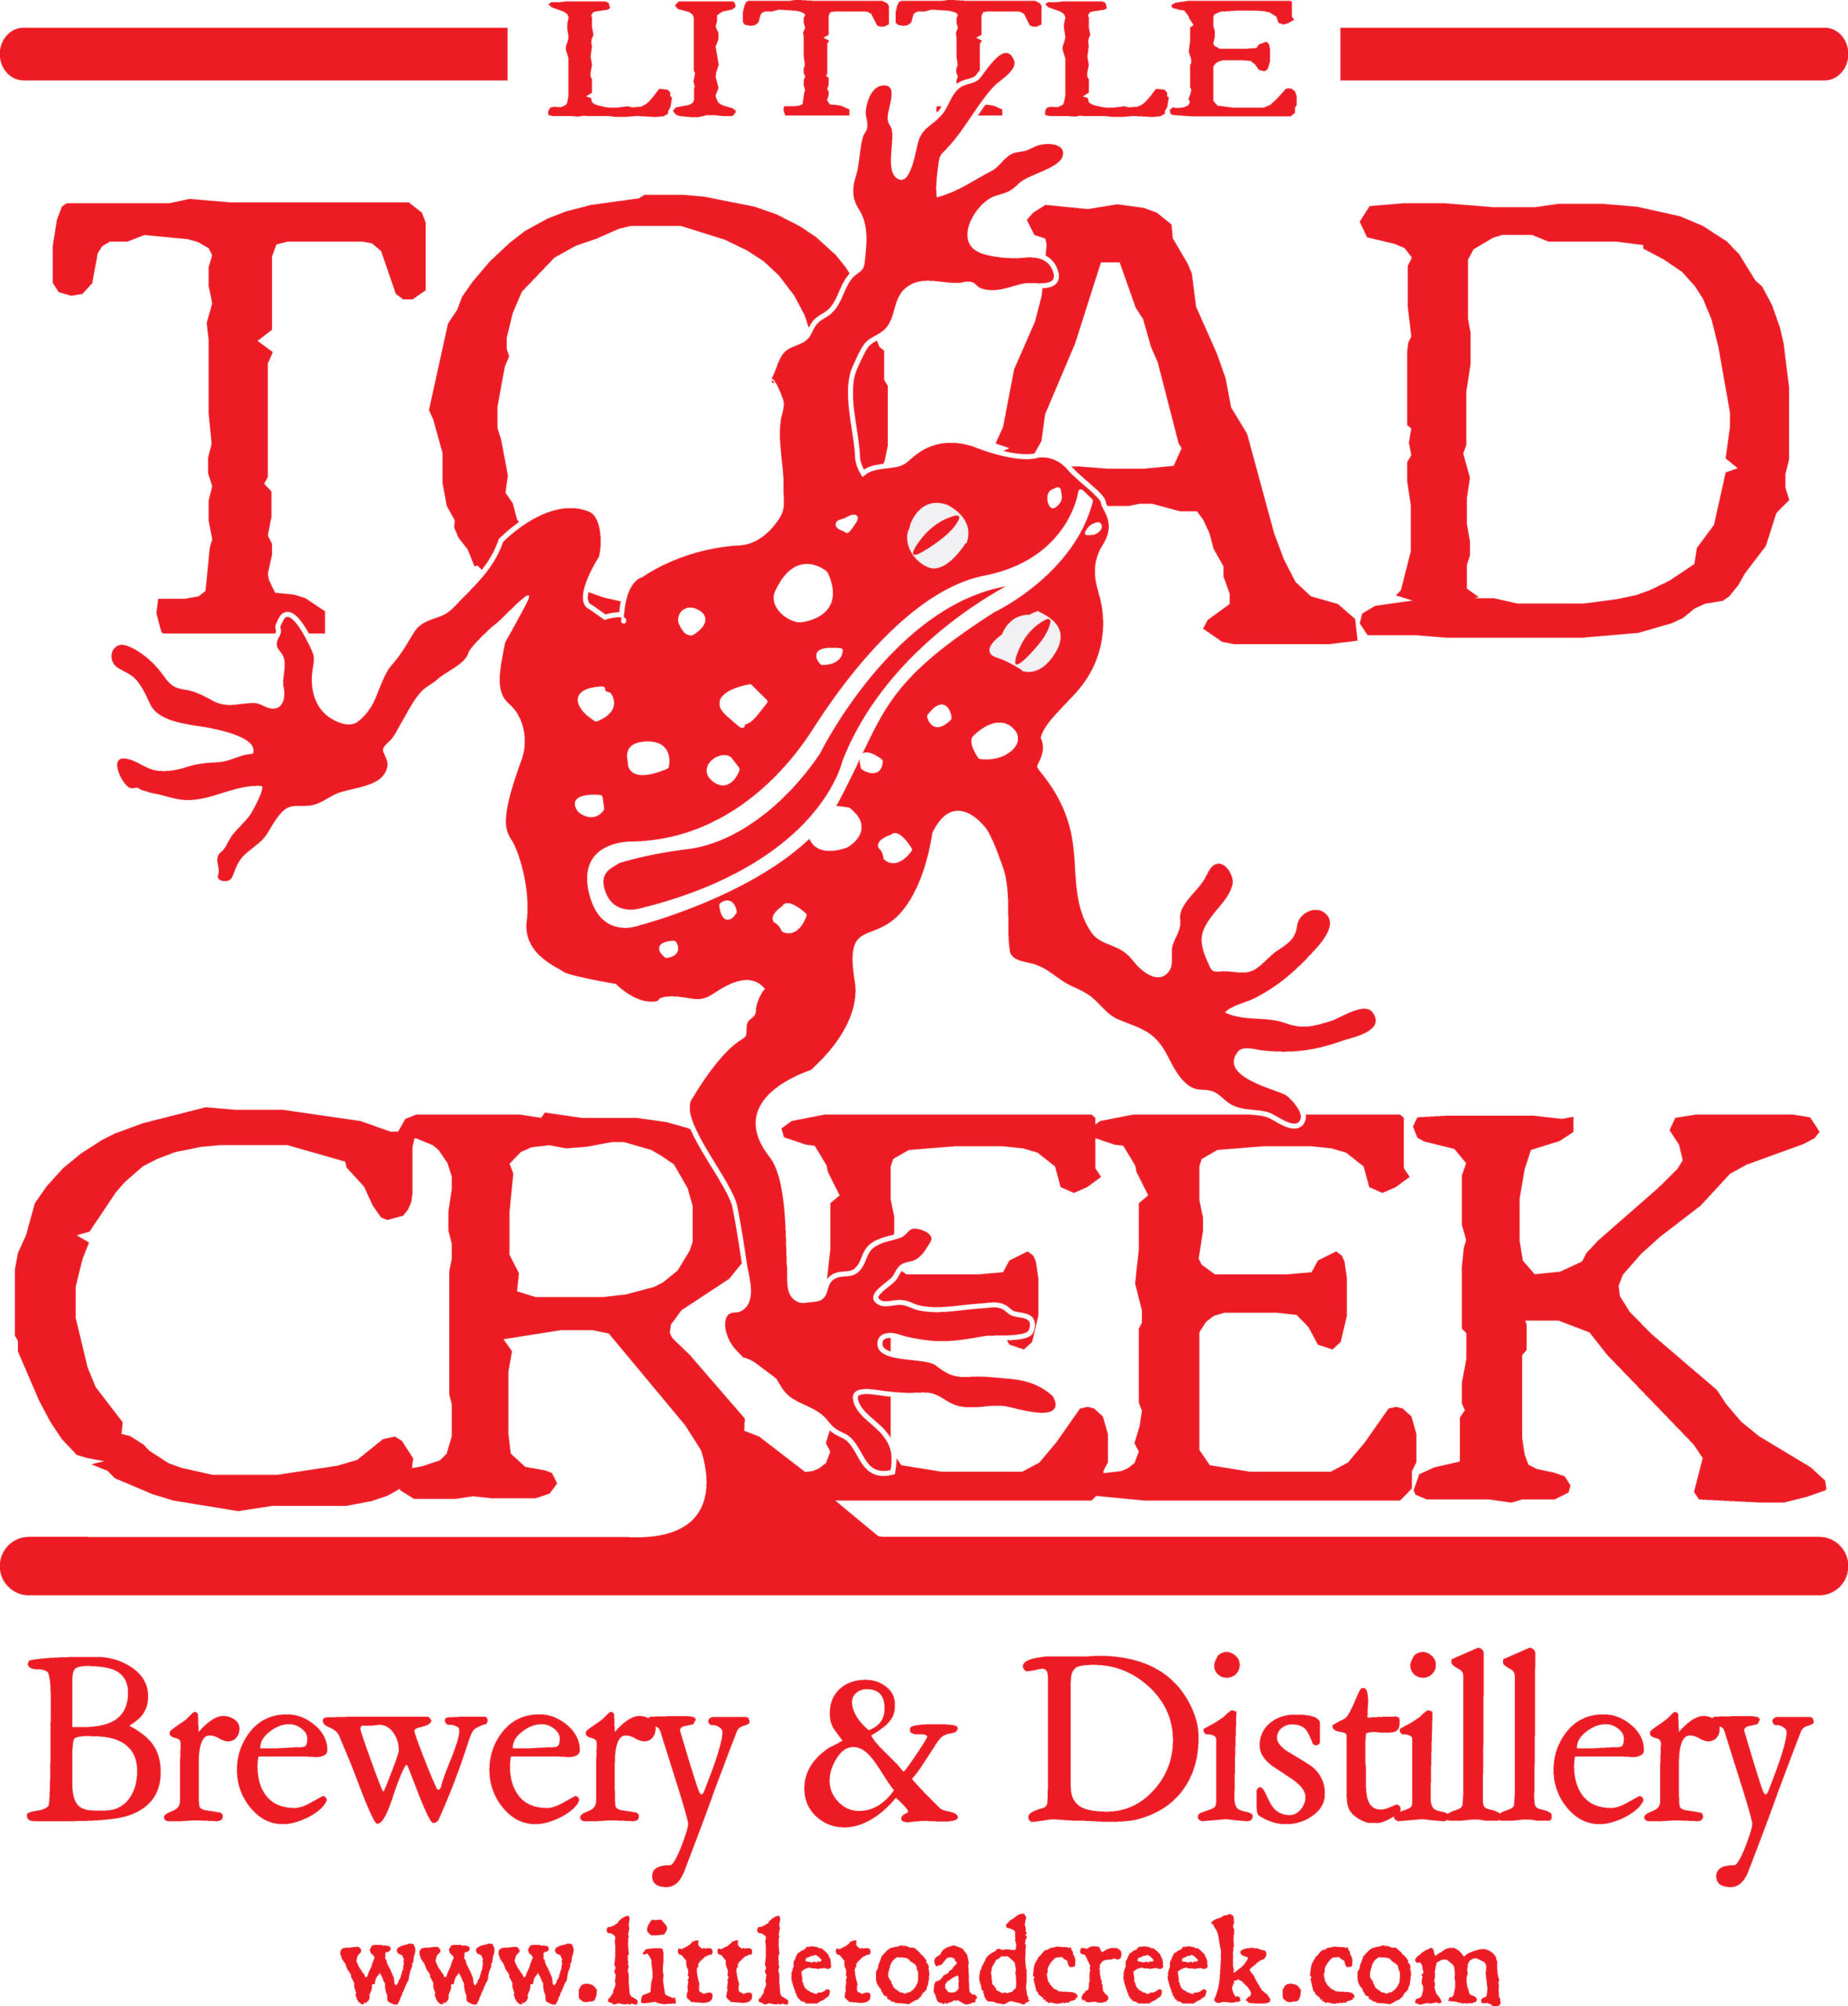 Little Toad Brewery